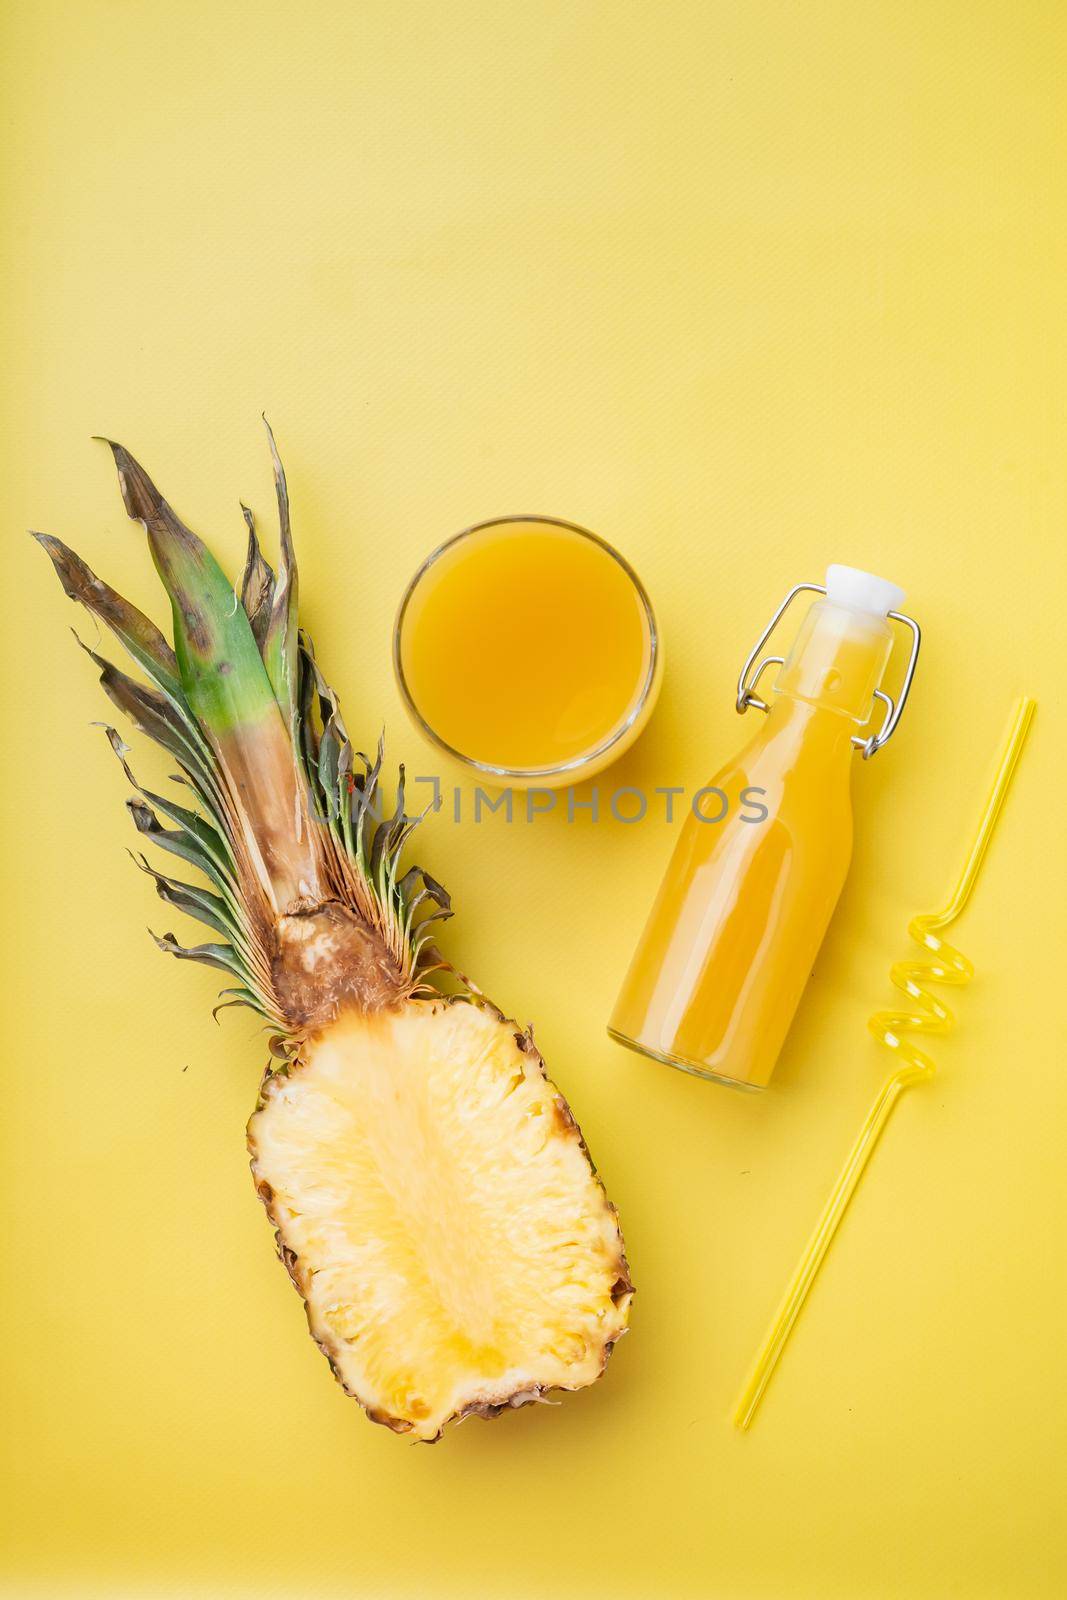 Pineapple juice, on yellow textured summer background, top view flat lay by Ilianesolenyi